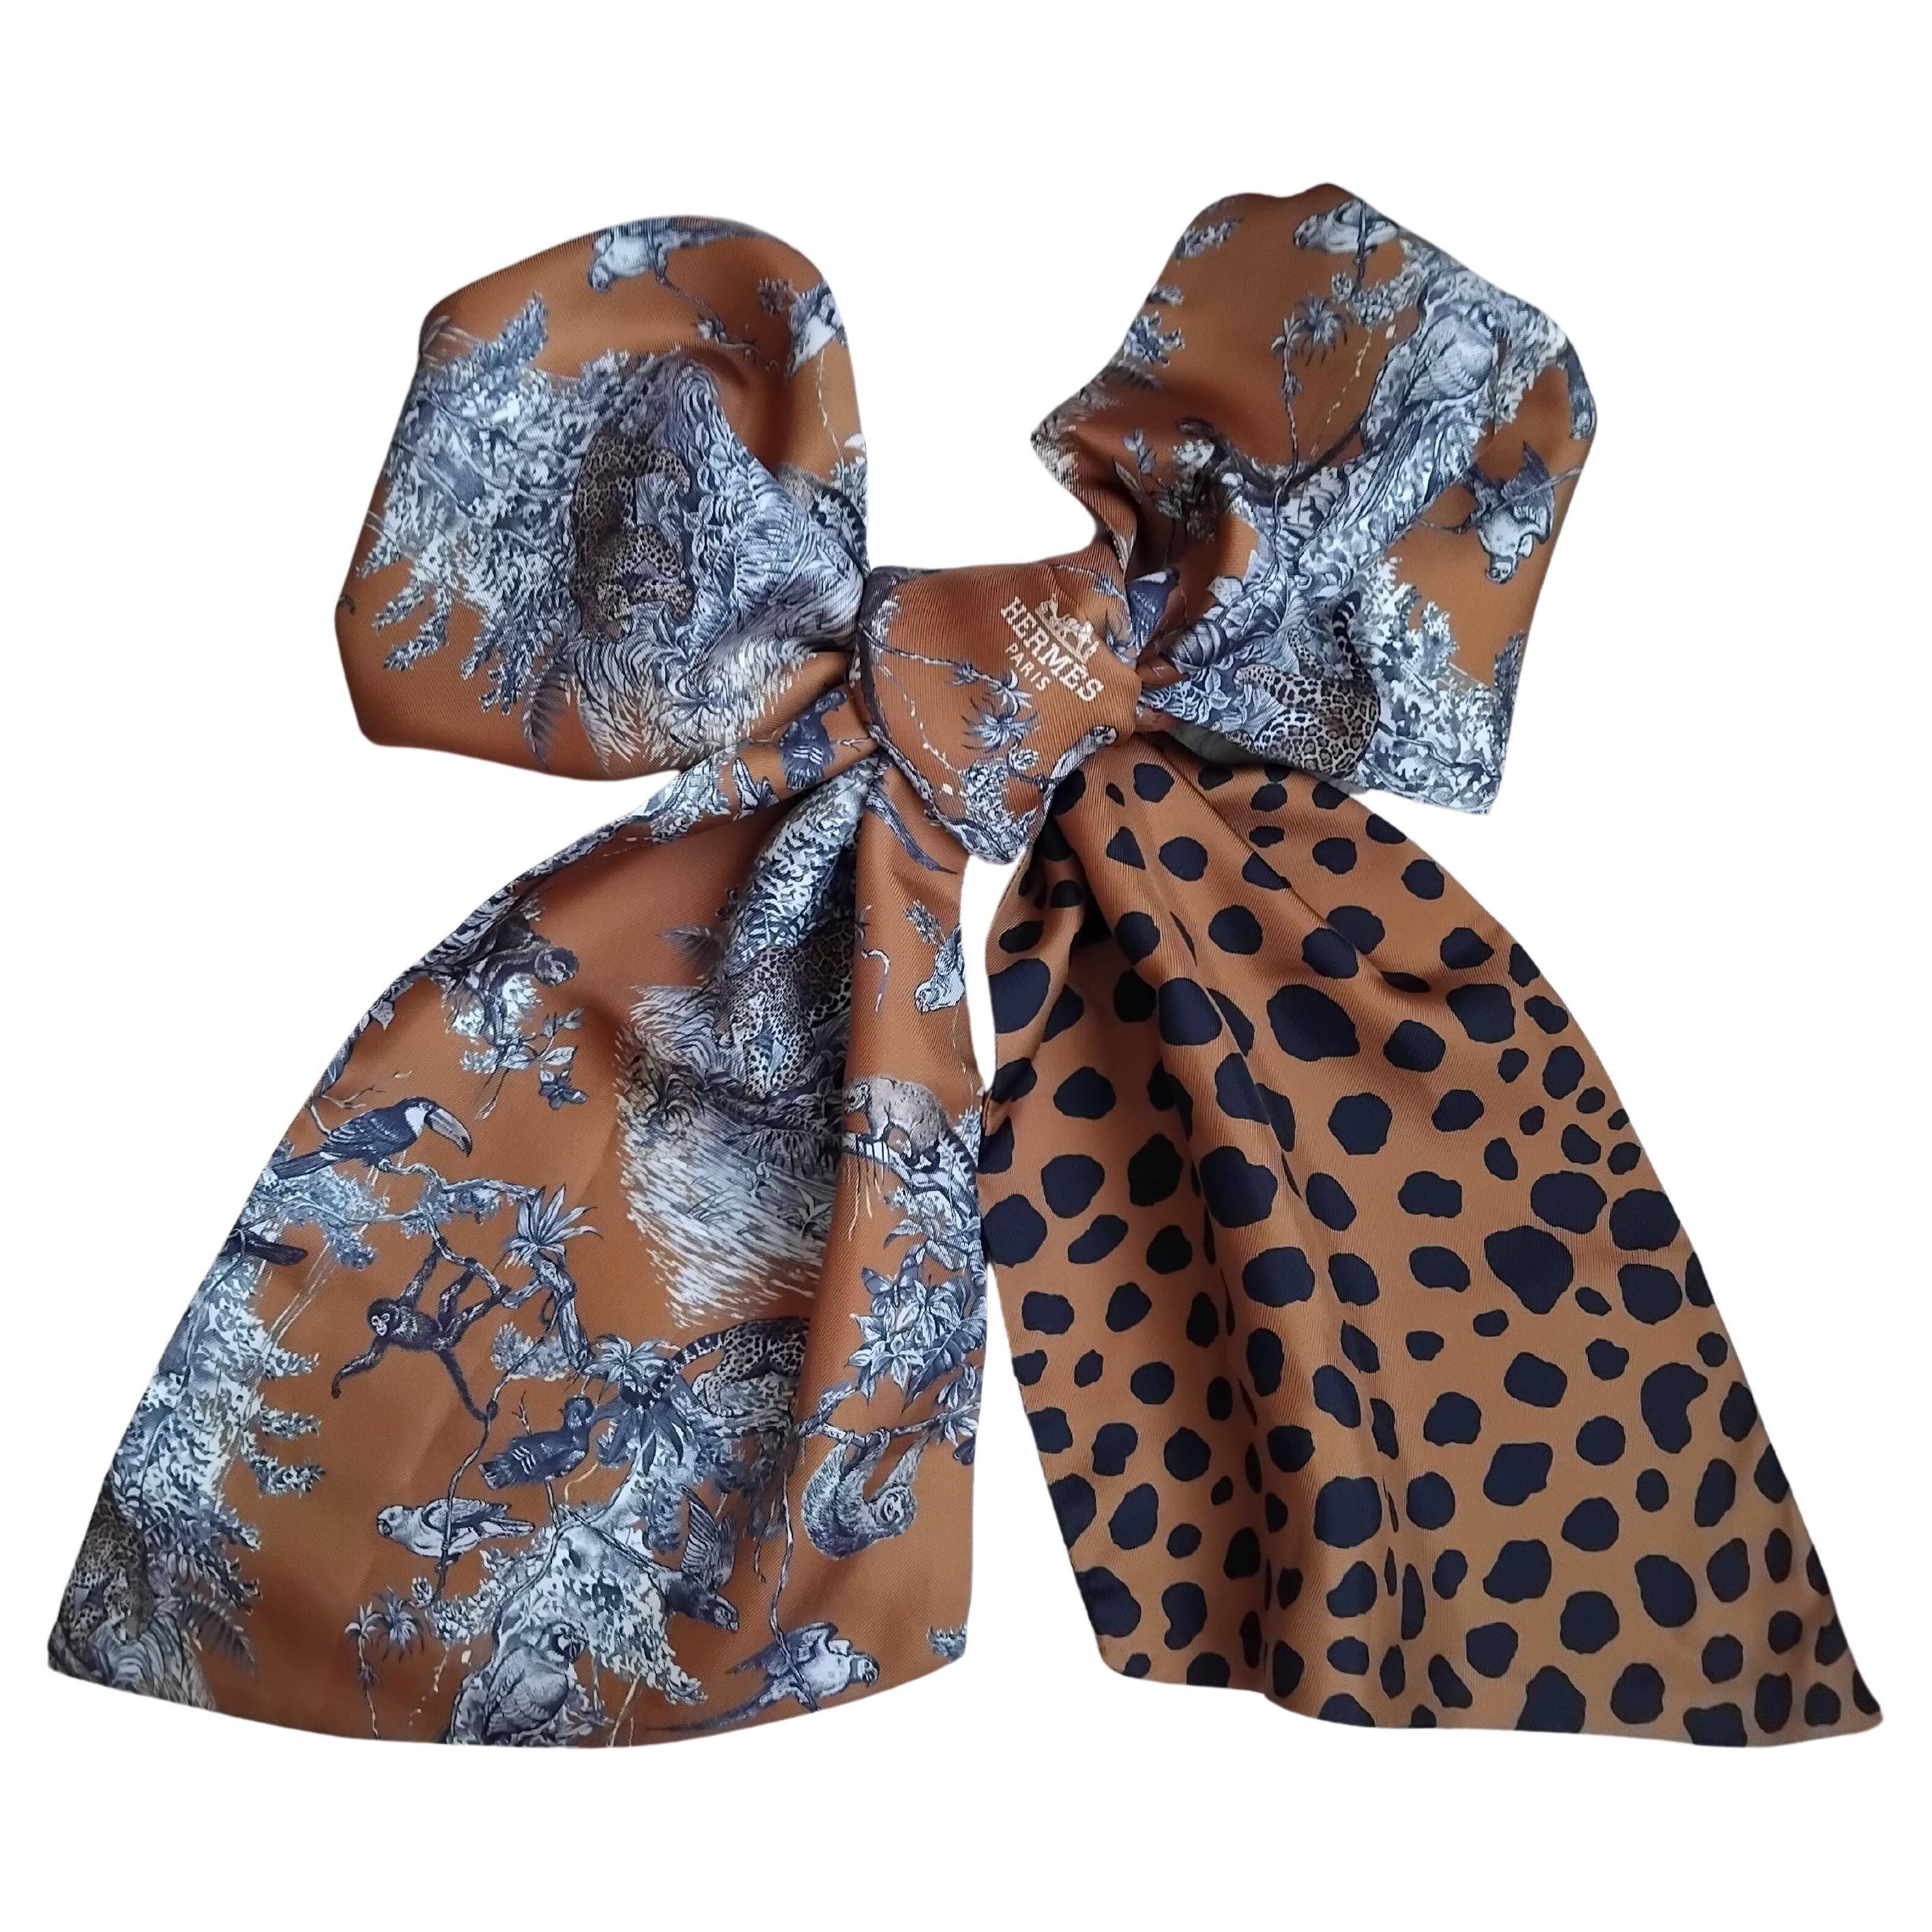 Absolutely Gorgeous Authentic Hermès Maxi Twilly Cut

Print: 